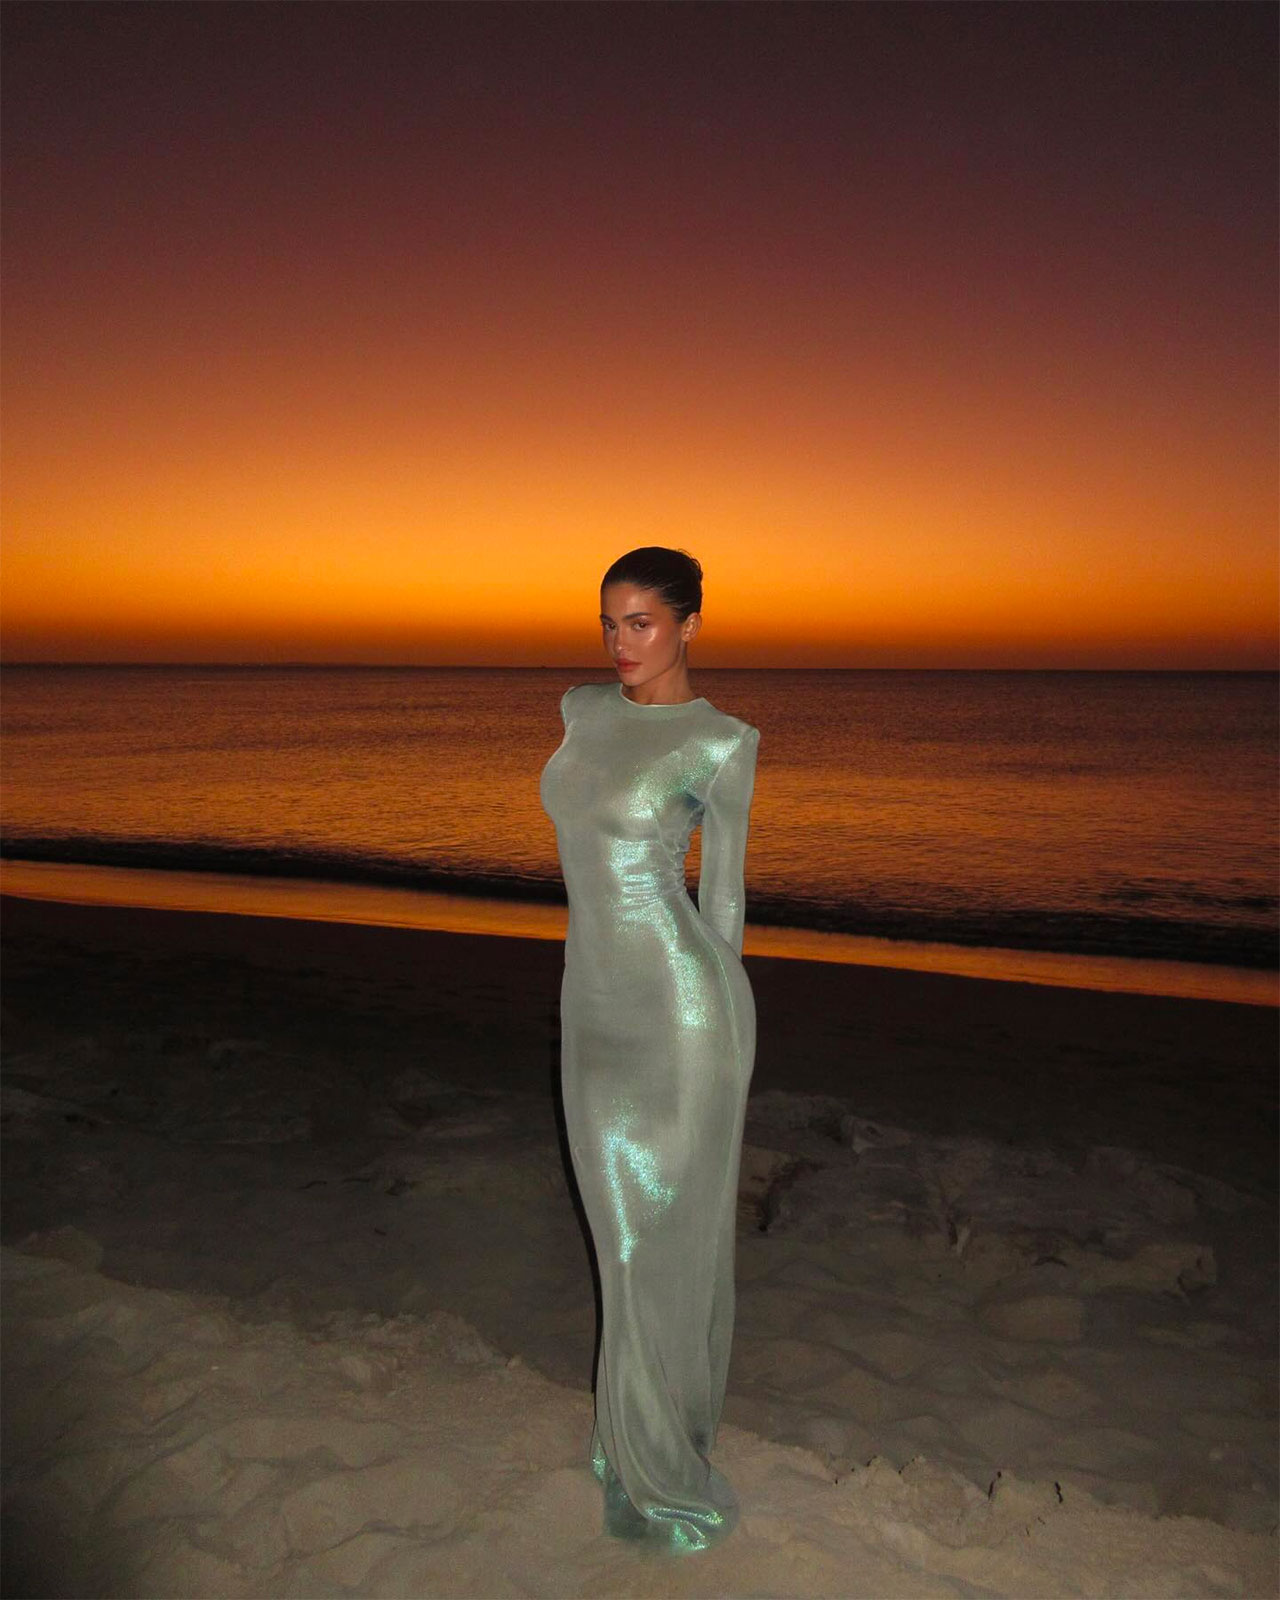 Kylie Jenner Shows Off Her Hourglass Figure In A Shimmery Maxi Dress ...